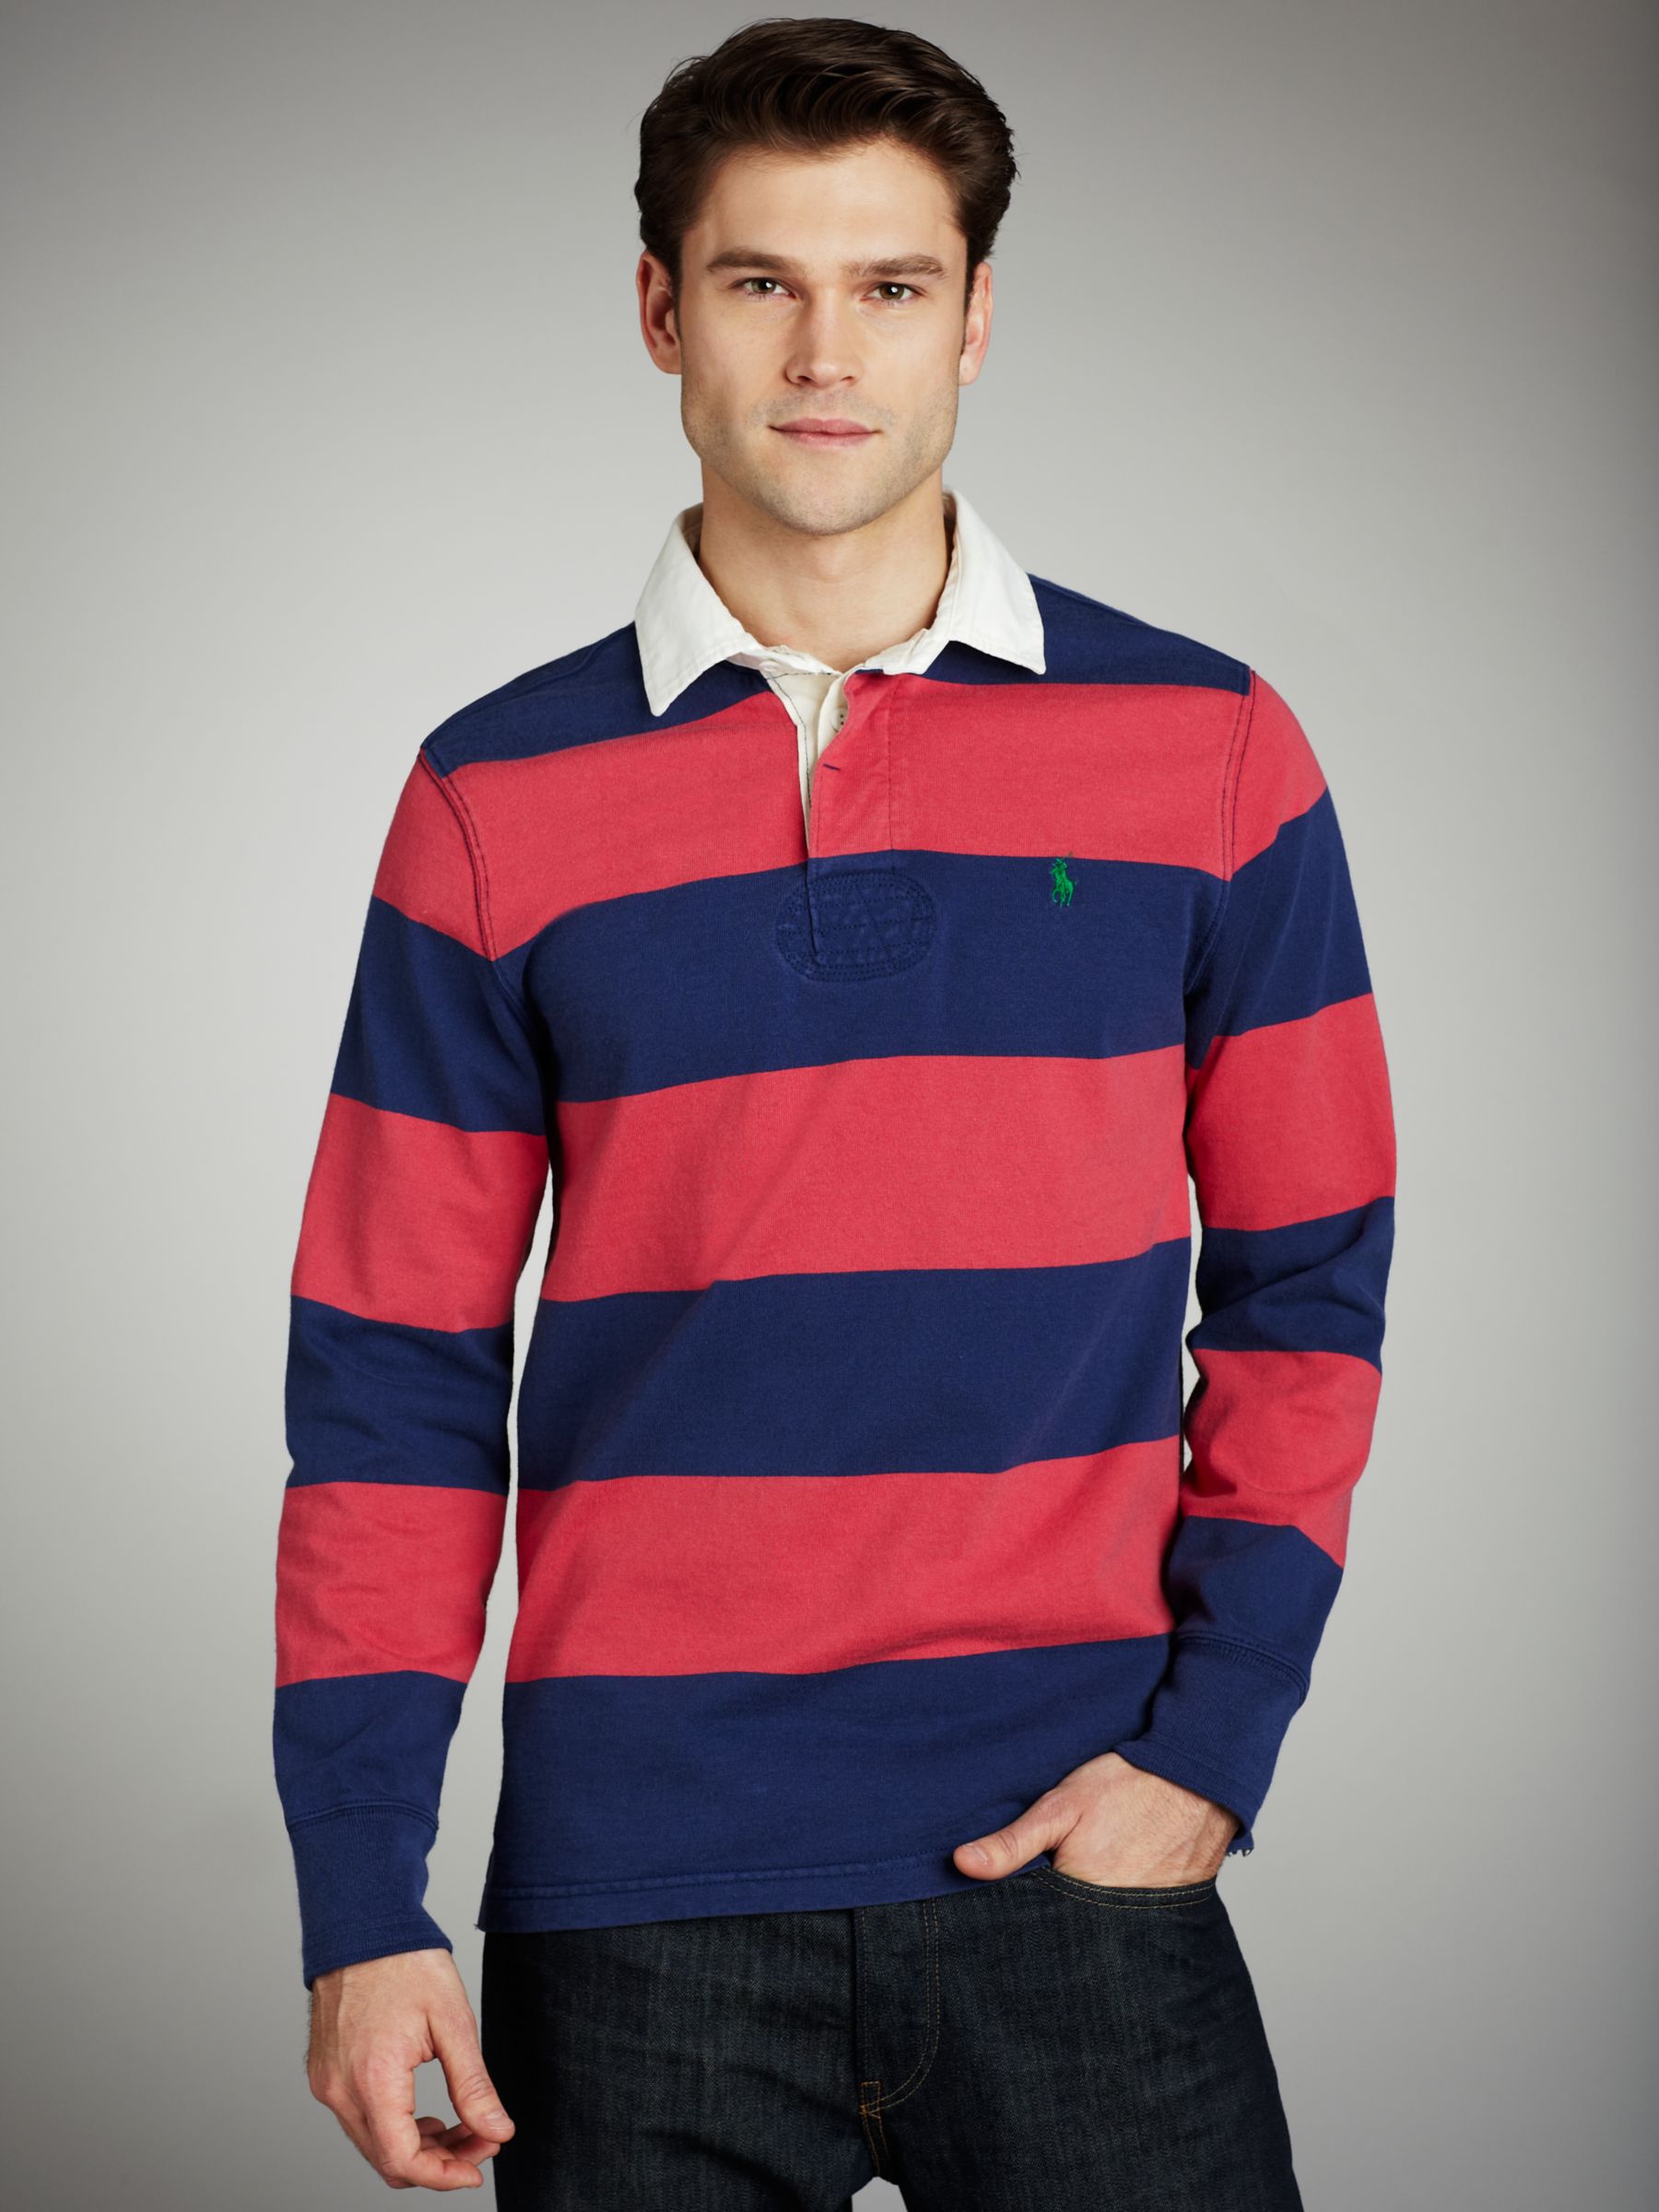 Polo Ralph Lauren Custom-Fit Rugby Shirt, Red/blue